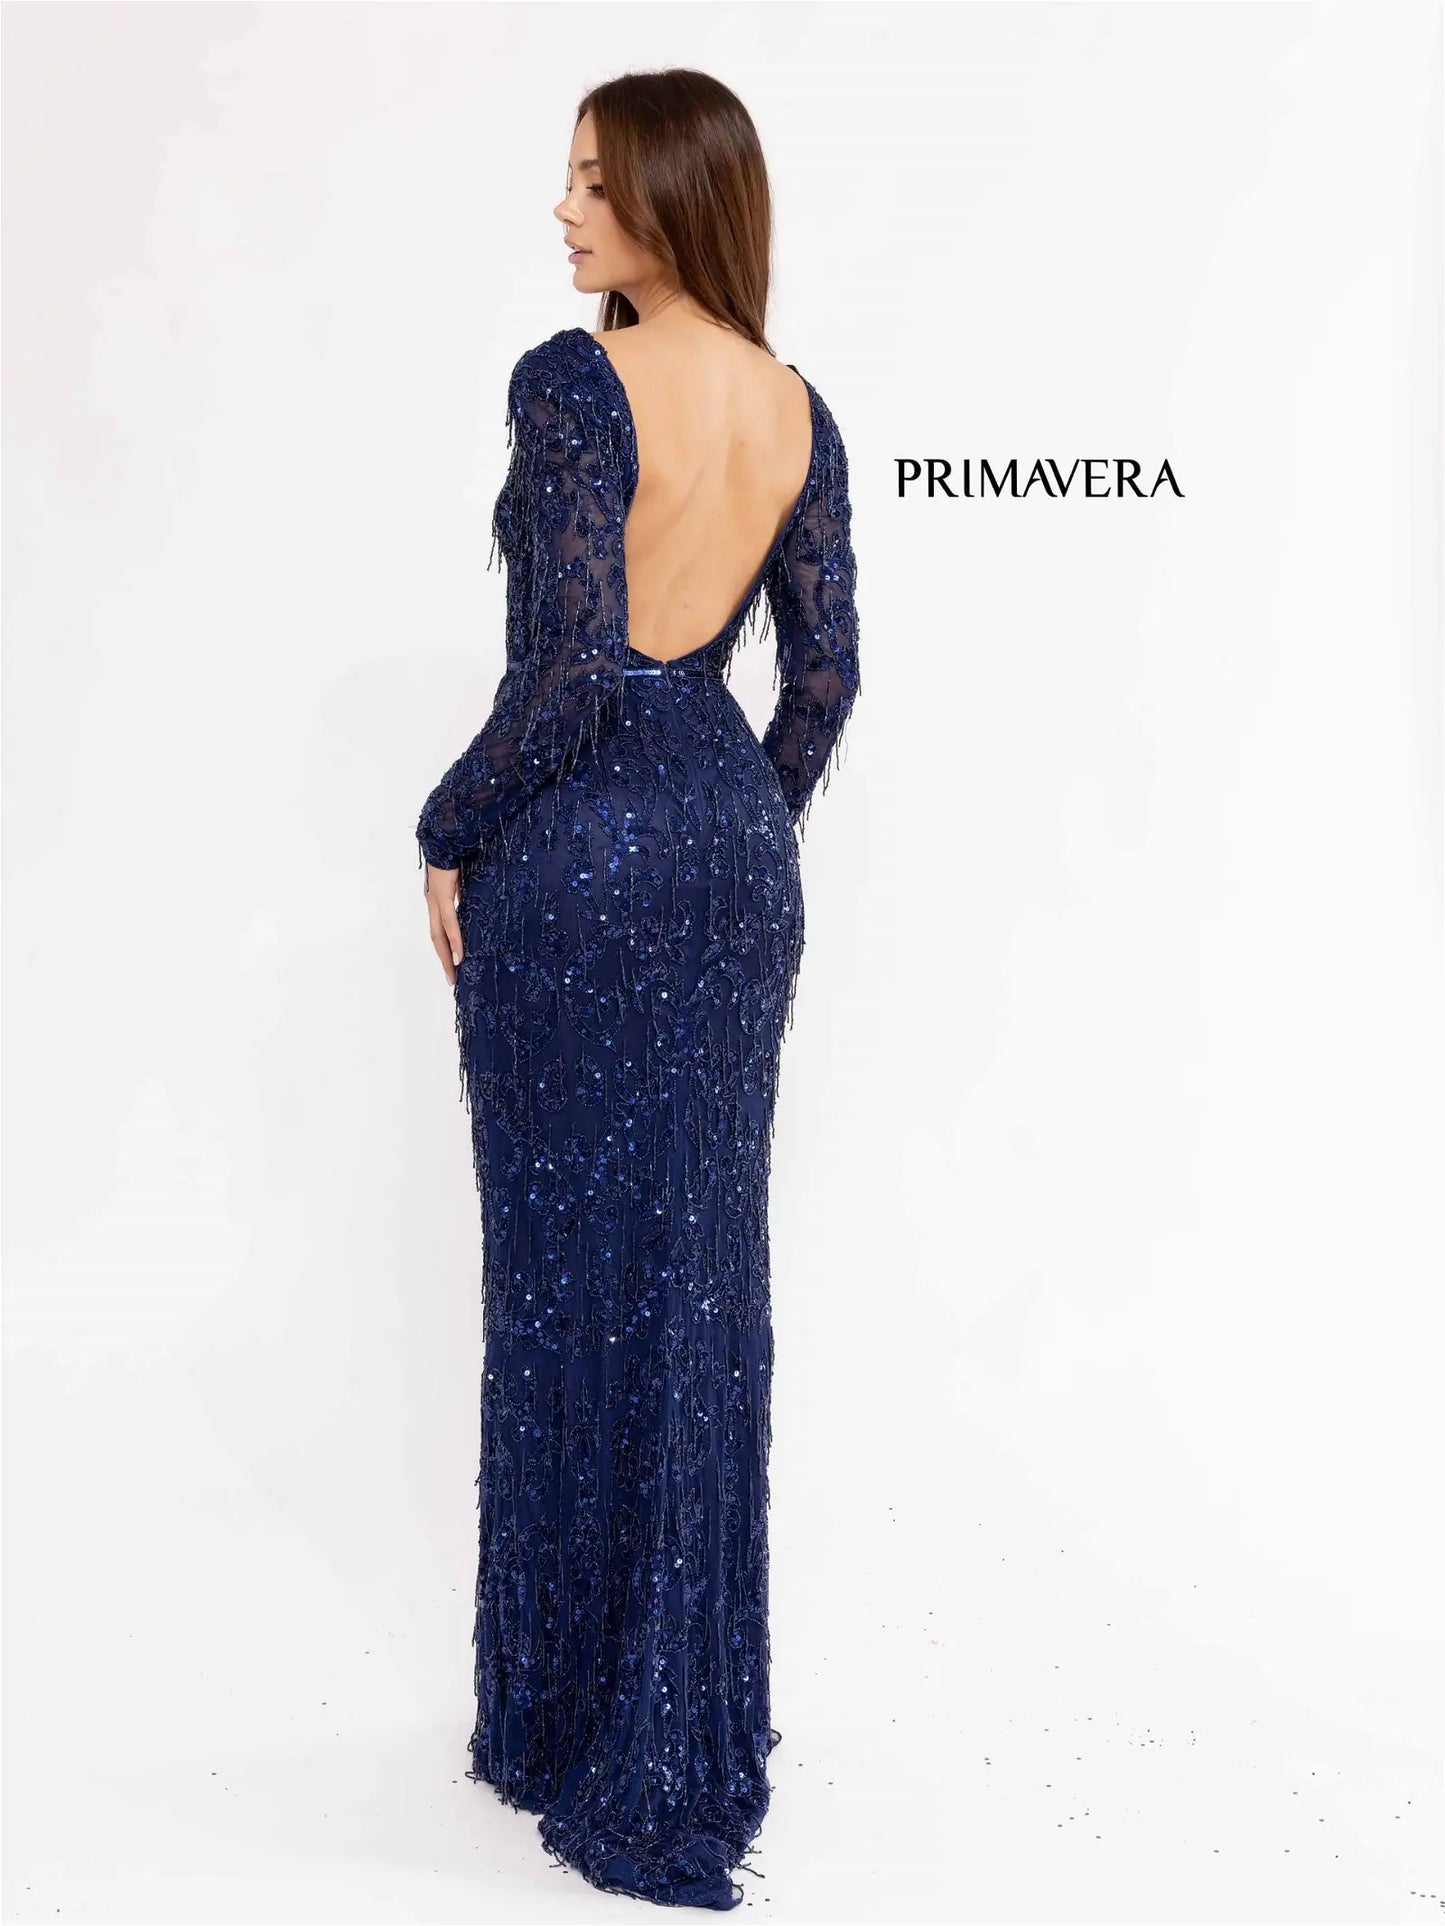 Primavera Couture 3954 Prom Dress Long Beaded Gown